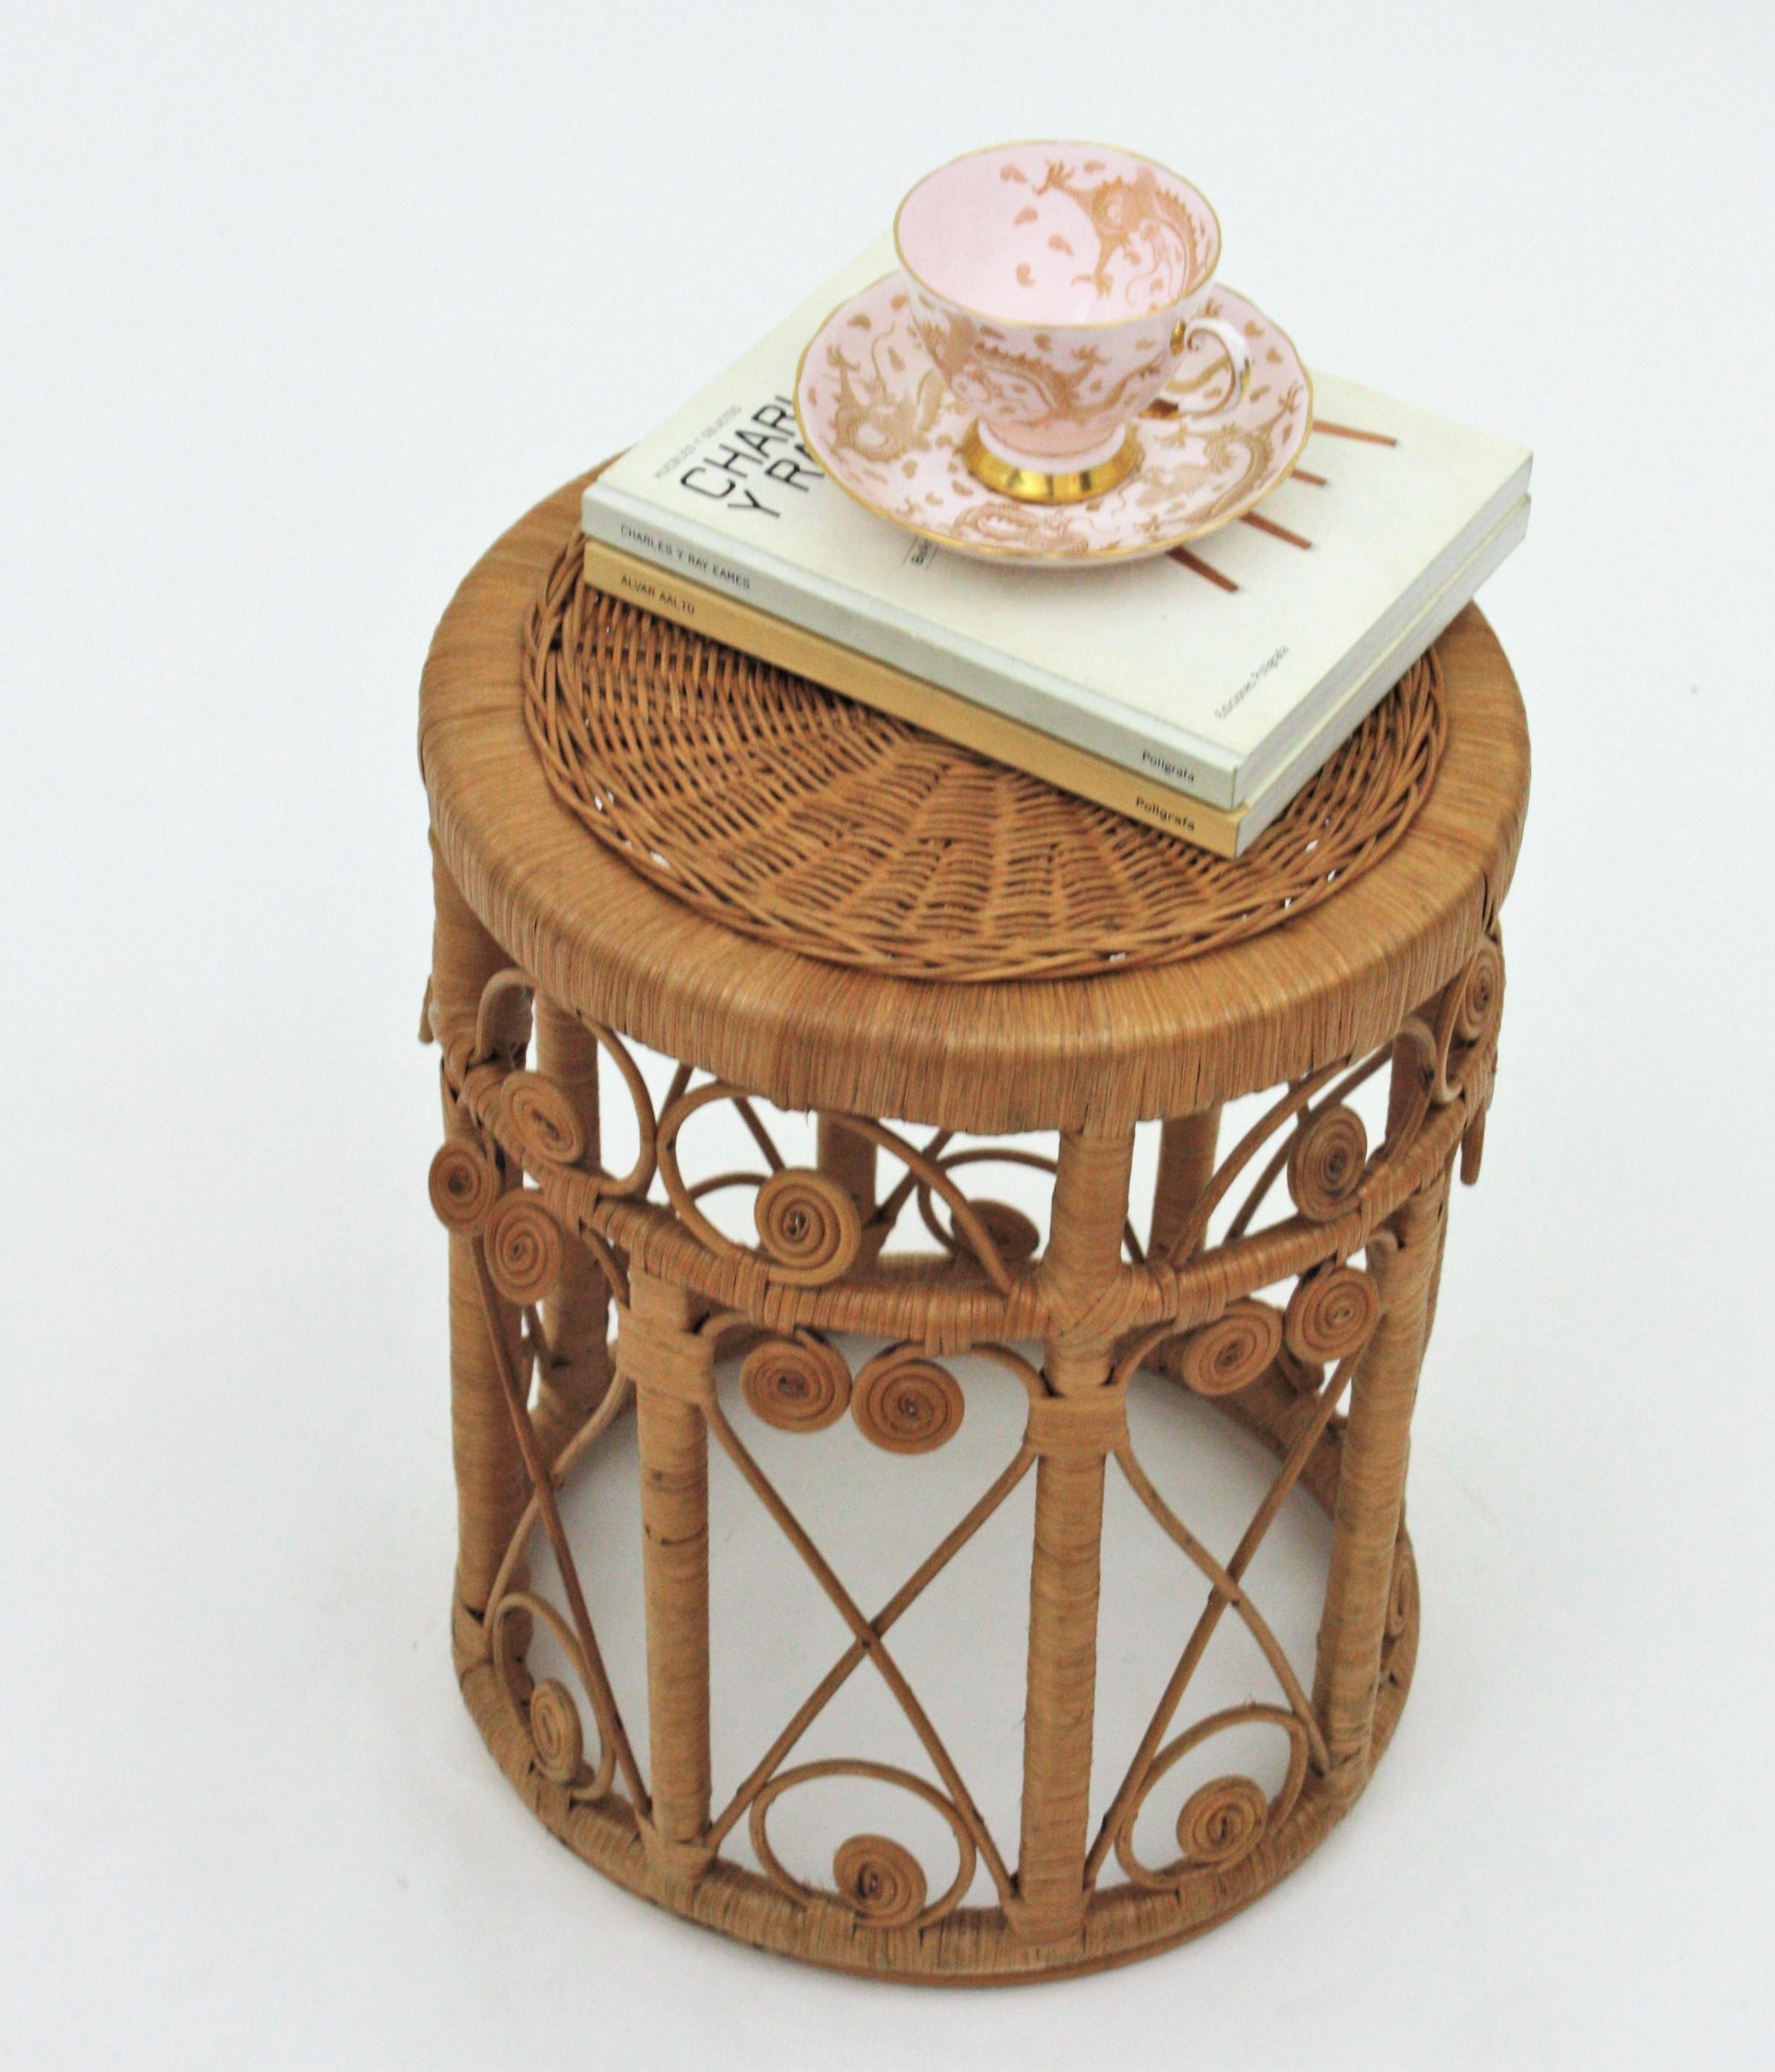 Cane Rattan Round Stool or End Table with Filigree Details, 1960s